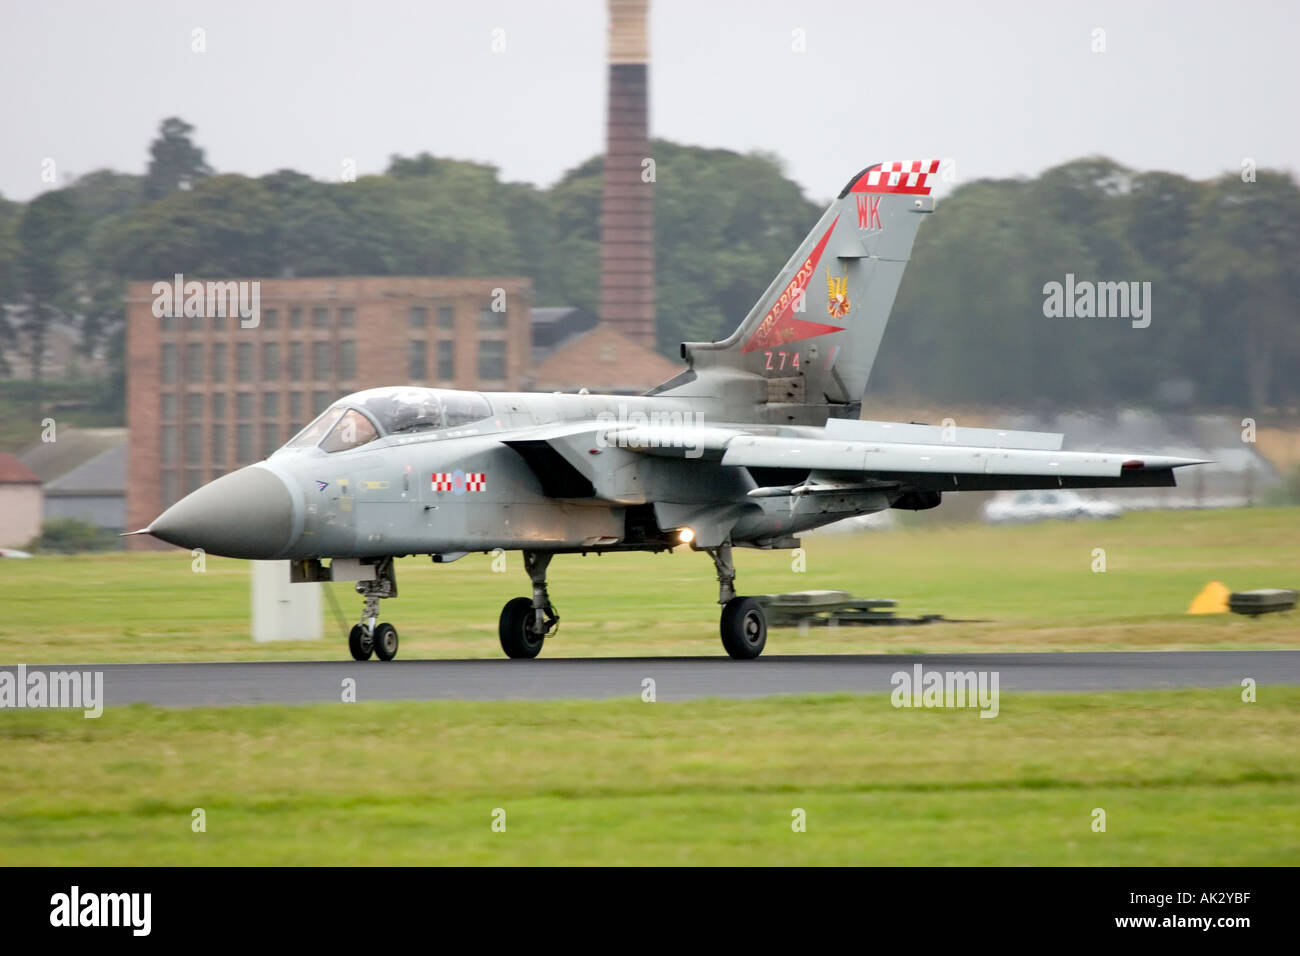 RAF Tornado F3 aircraft touches down to land on runway Stock Photo